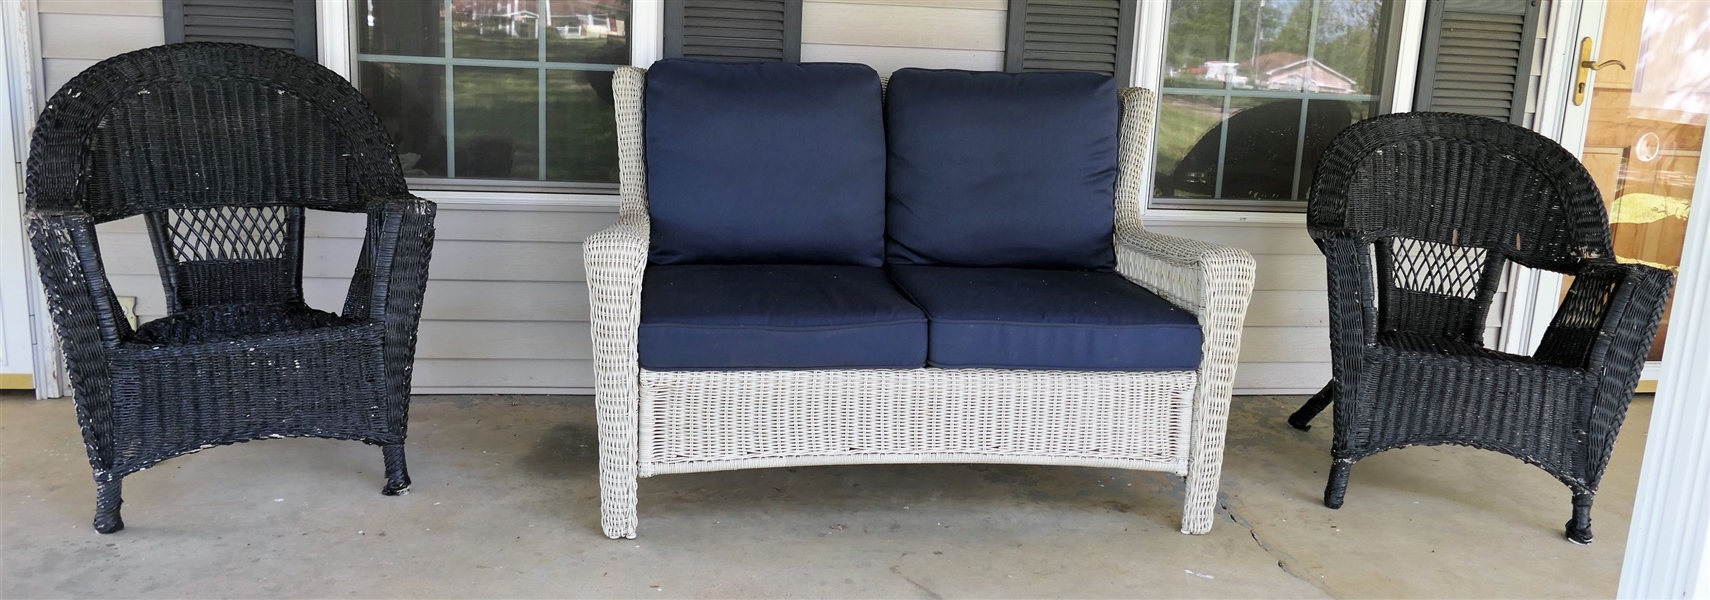 Wicker Love Seat and 2 Chairs